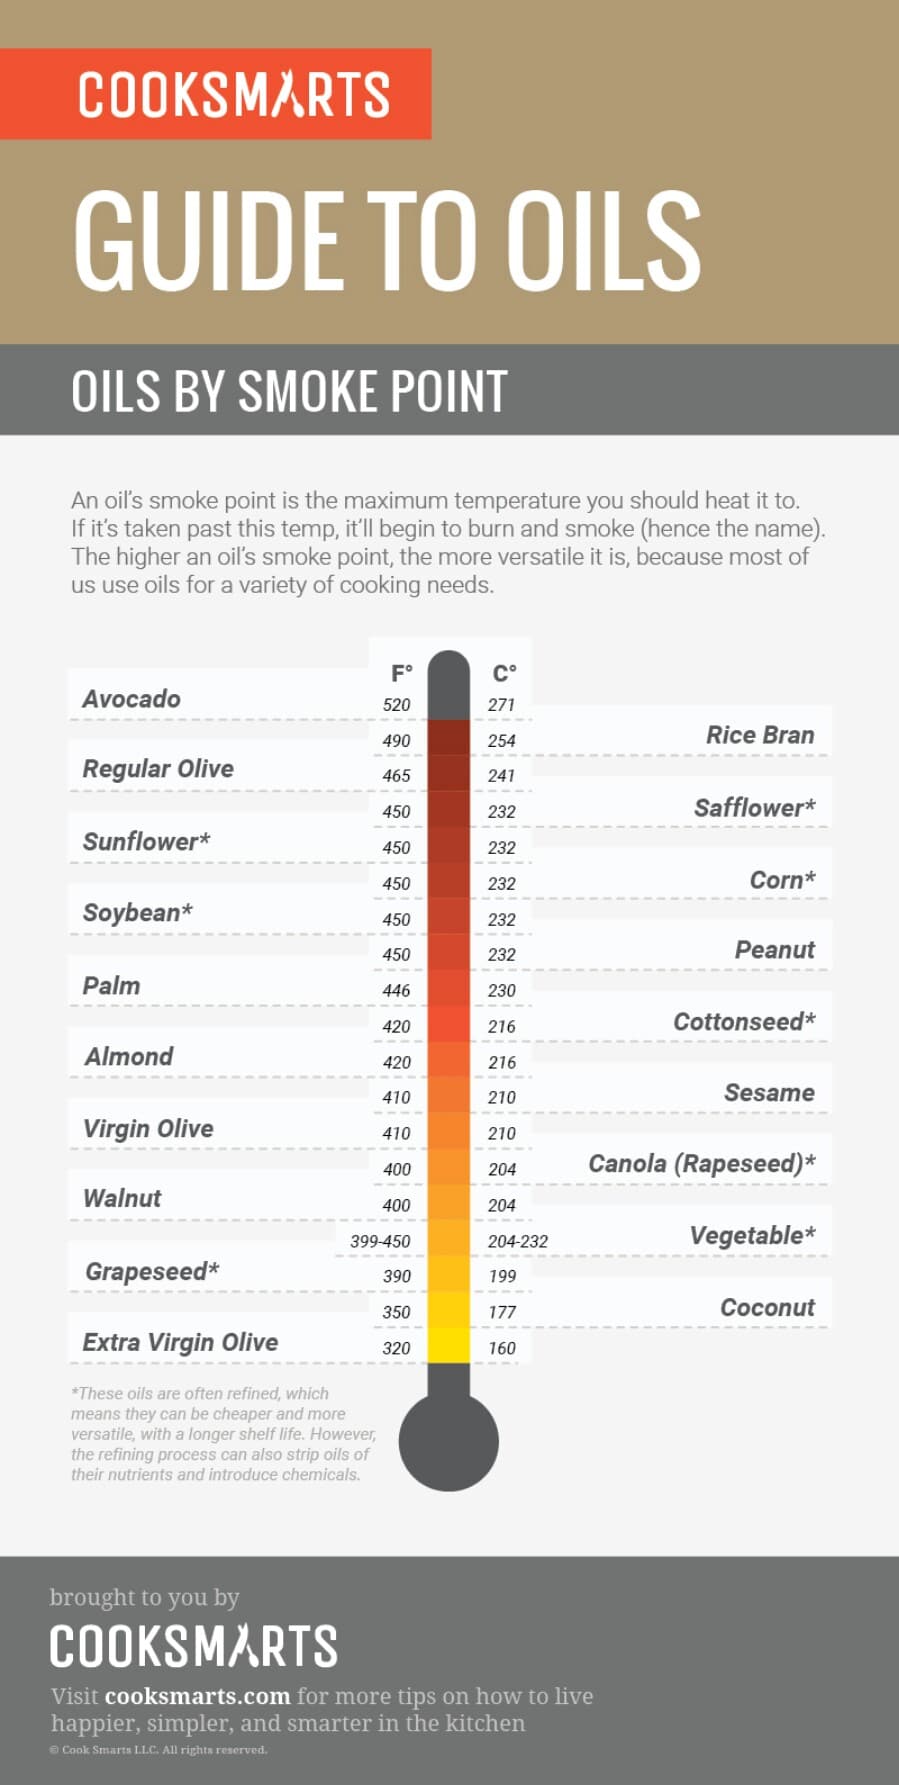 A guide to oils by smoke point.